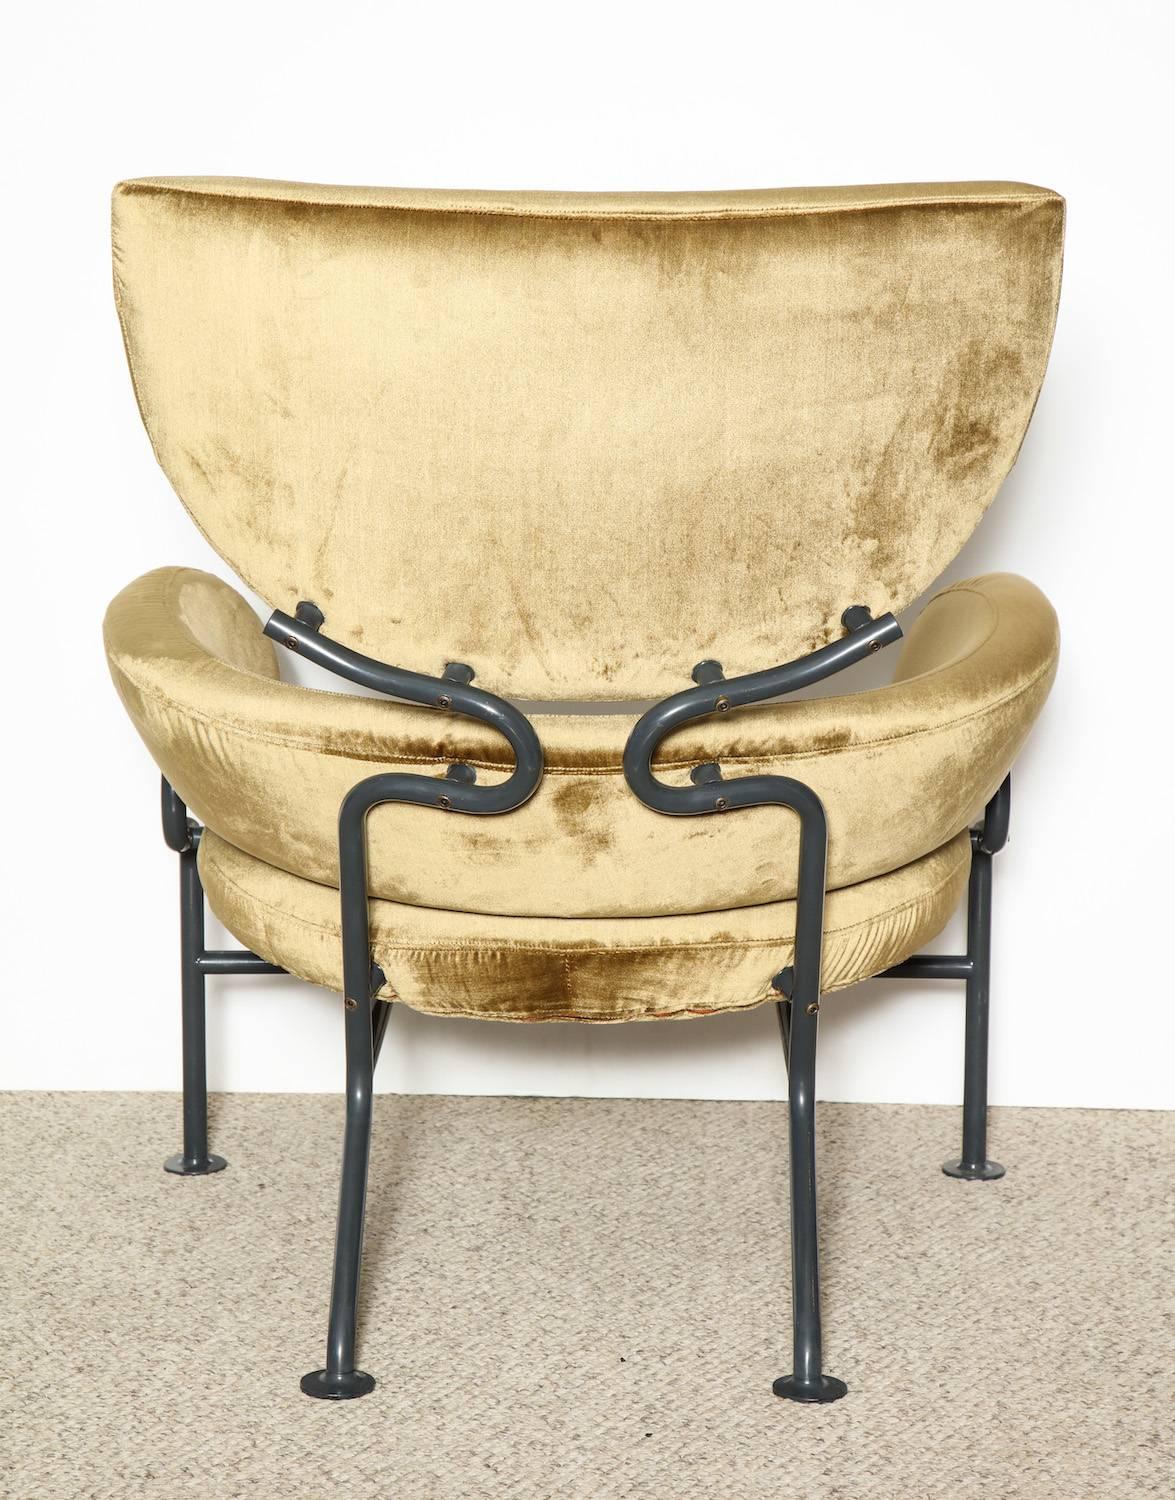 "Tre Pezzi," pair of early lounge chairs by Franco Albini and Franca Helg for Poggi. Enameled steel tubing with gold or bronze velvet upholstery. This early pair of chairs was produced in the mid 1960s.